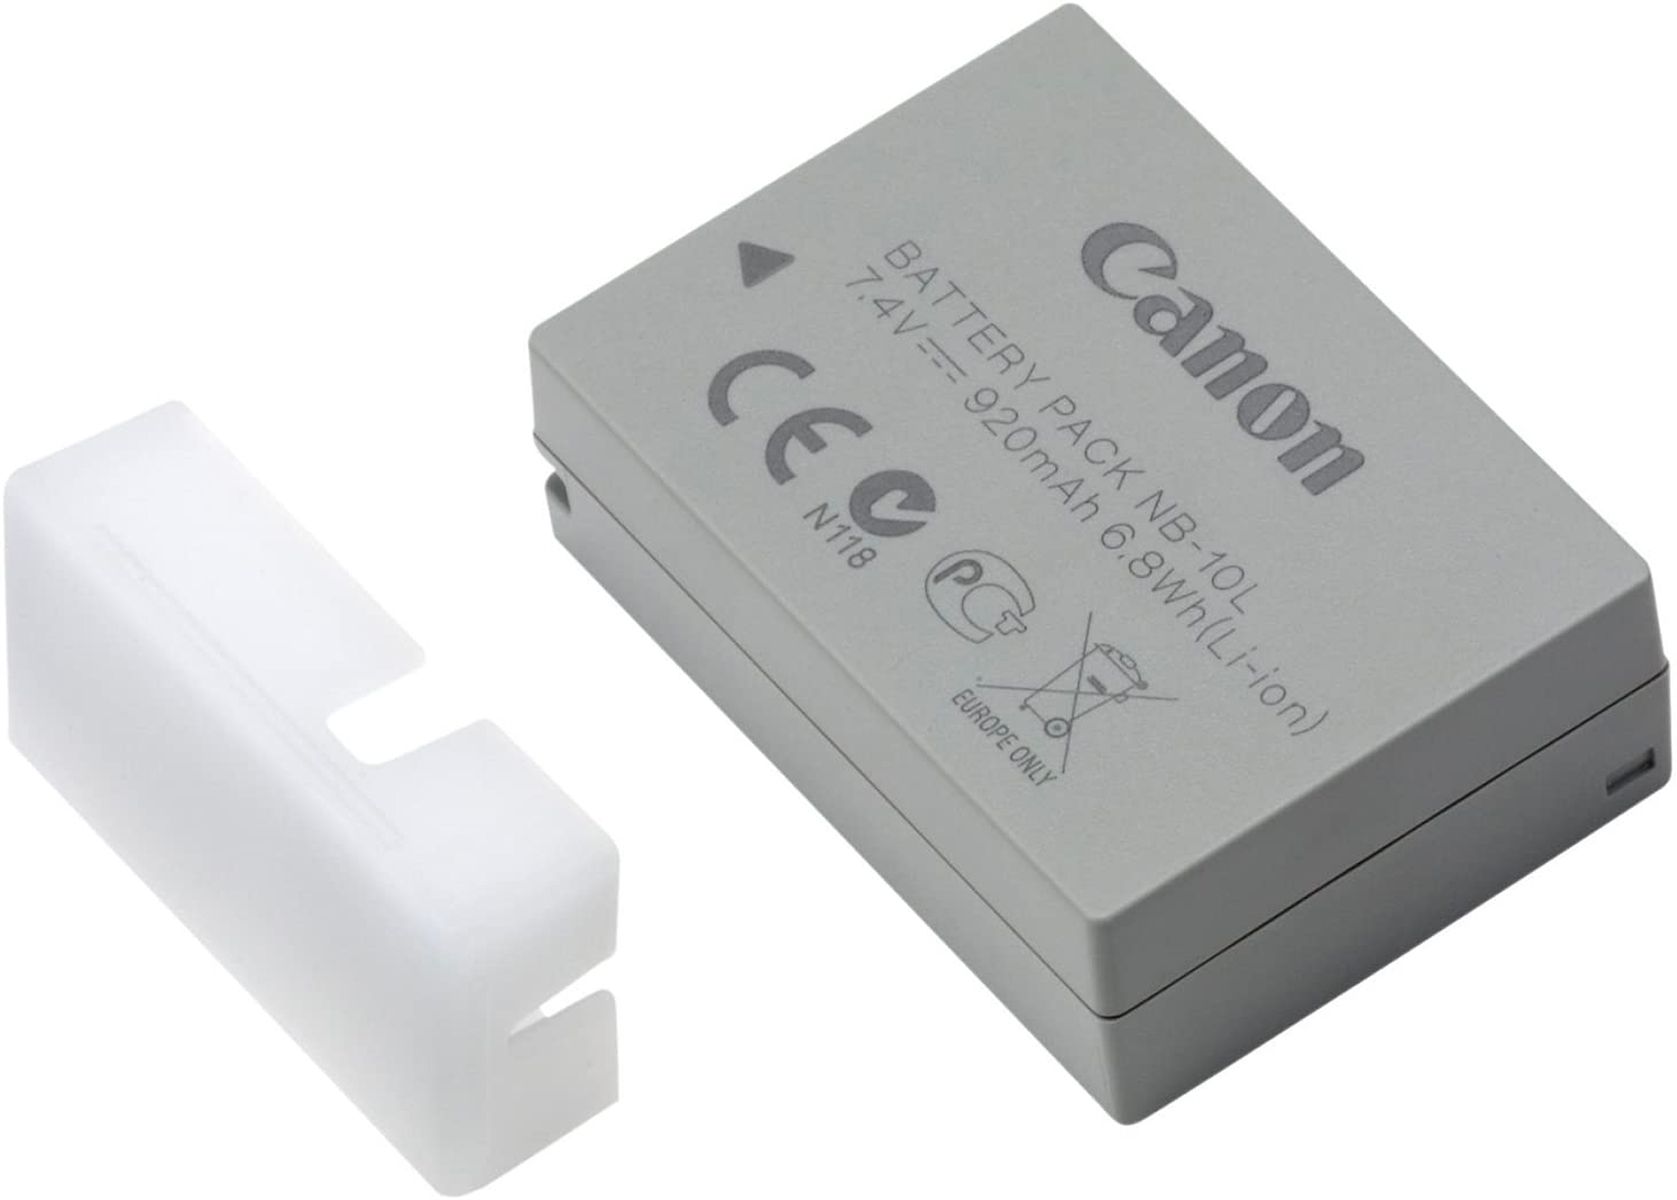 CANON - Battery for 50HS/G1X/SX50HS/G16